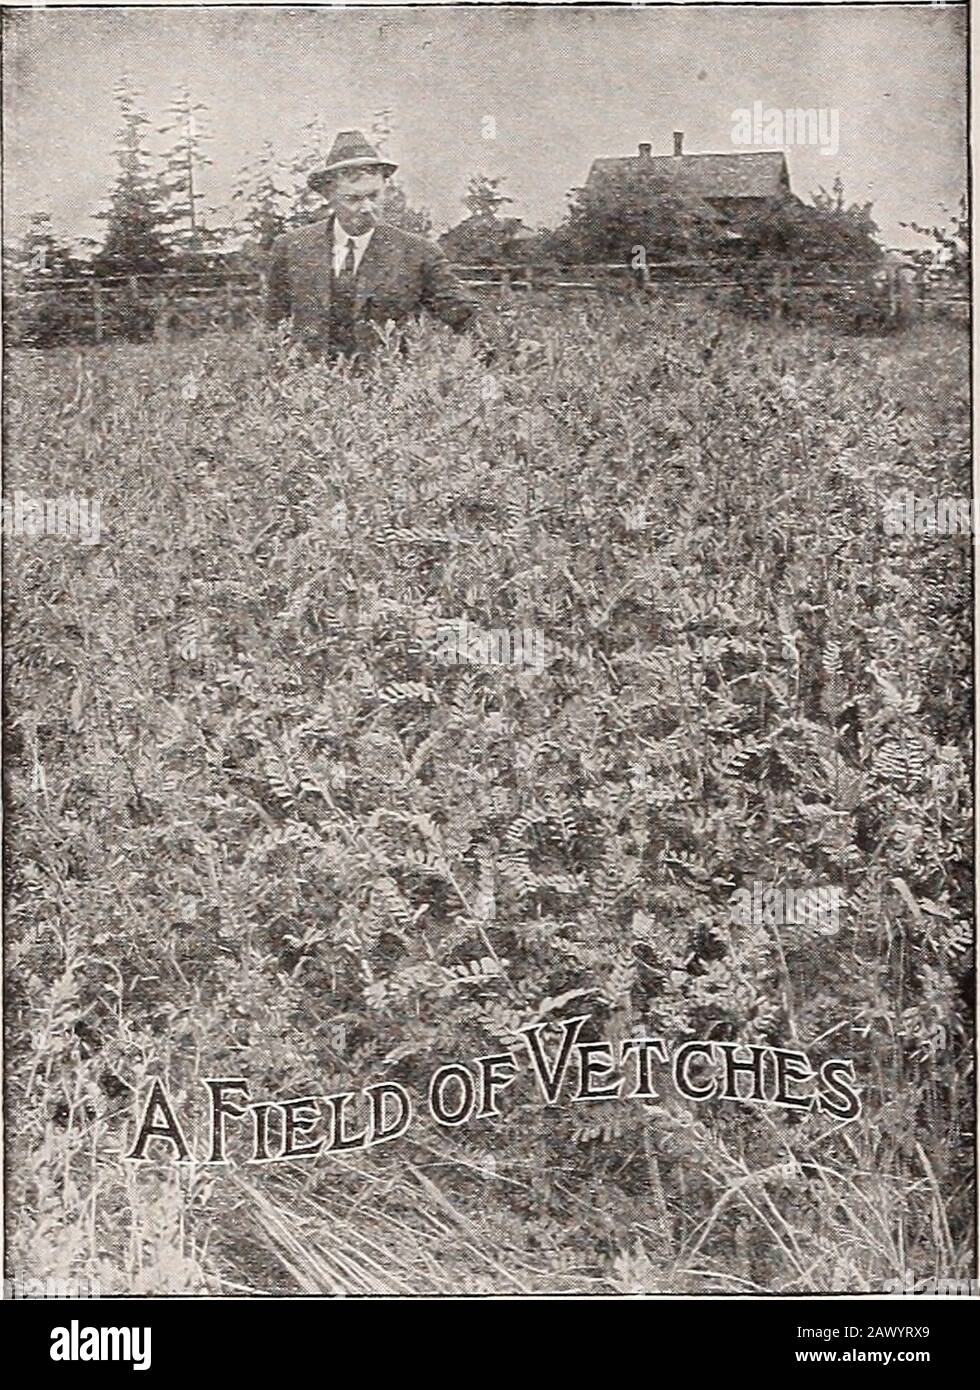 Dreer's autumn catalogue 1920 . ANED GRASS SEEDS Prices subject to market change Purchase! pays freight or express charges loo lbs. Kentucky Blue, Fancy. Bu. (14 lbs.), $5.00 $35 00 Red Top Grass. Bu. (10 lbs.),$2.00; bag (50 lbs.), $8.00 15 00 Red Top Grass, Fancy (free from chaff). Bu. (32 lbs.),$8.50 25 00 Orchard Grass. Bu. (14 lbs.), $4.50 30 00 English Perennial Rye Grass. Bu. (24 lbs.), $3.75 15 00 Italian Rye Grass. Bu. (18 lbs.), $3.00 15 00 Sheeps Fescue. Bu. (12 lbs.), $4.25 35 00 Hard Fescue. Bu. (12 lbs.), $4.25 35 00 Red or Creeping Fescue. Bu. (14 lbs.), $6.50 45 00 Tall Meadow Stock Photo